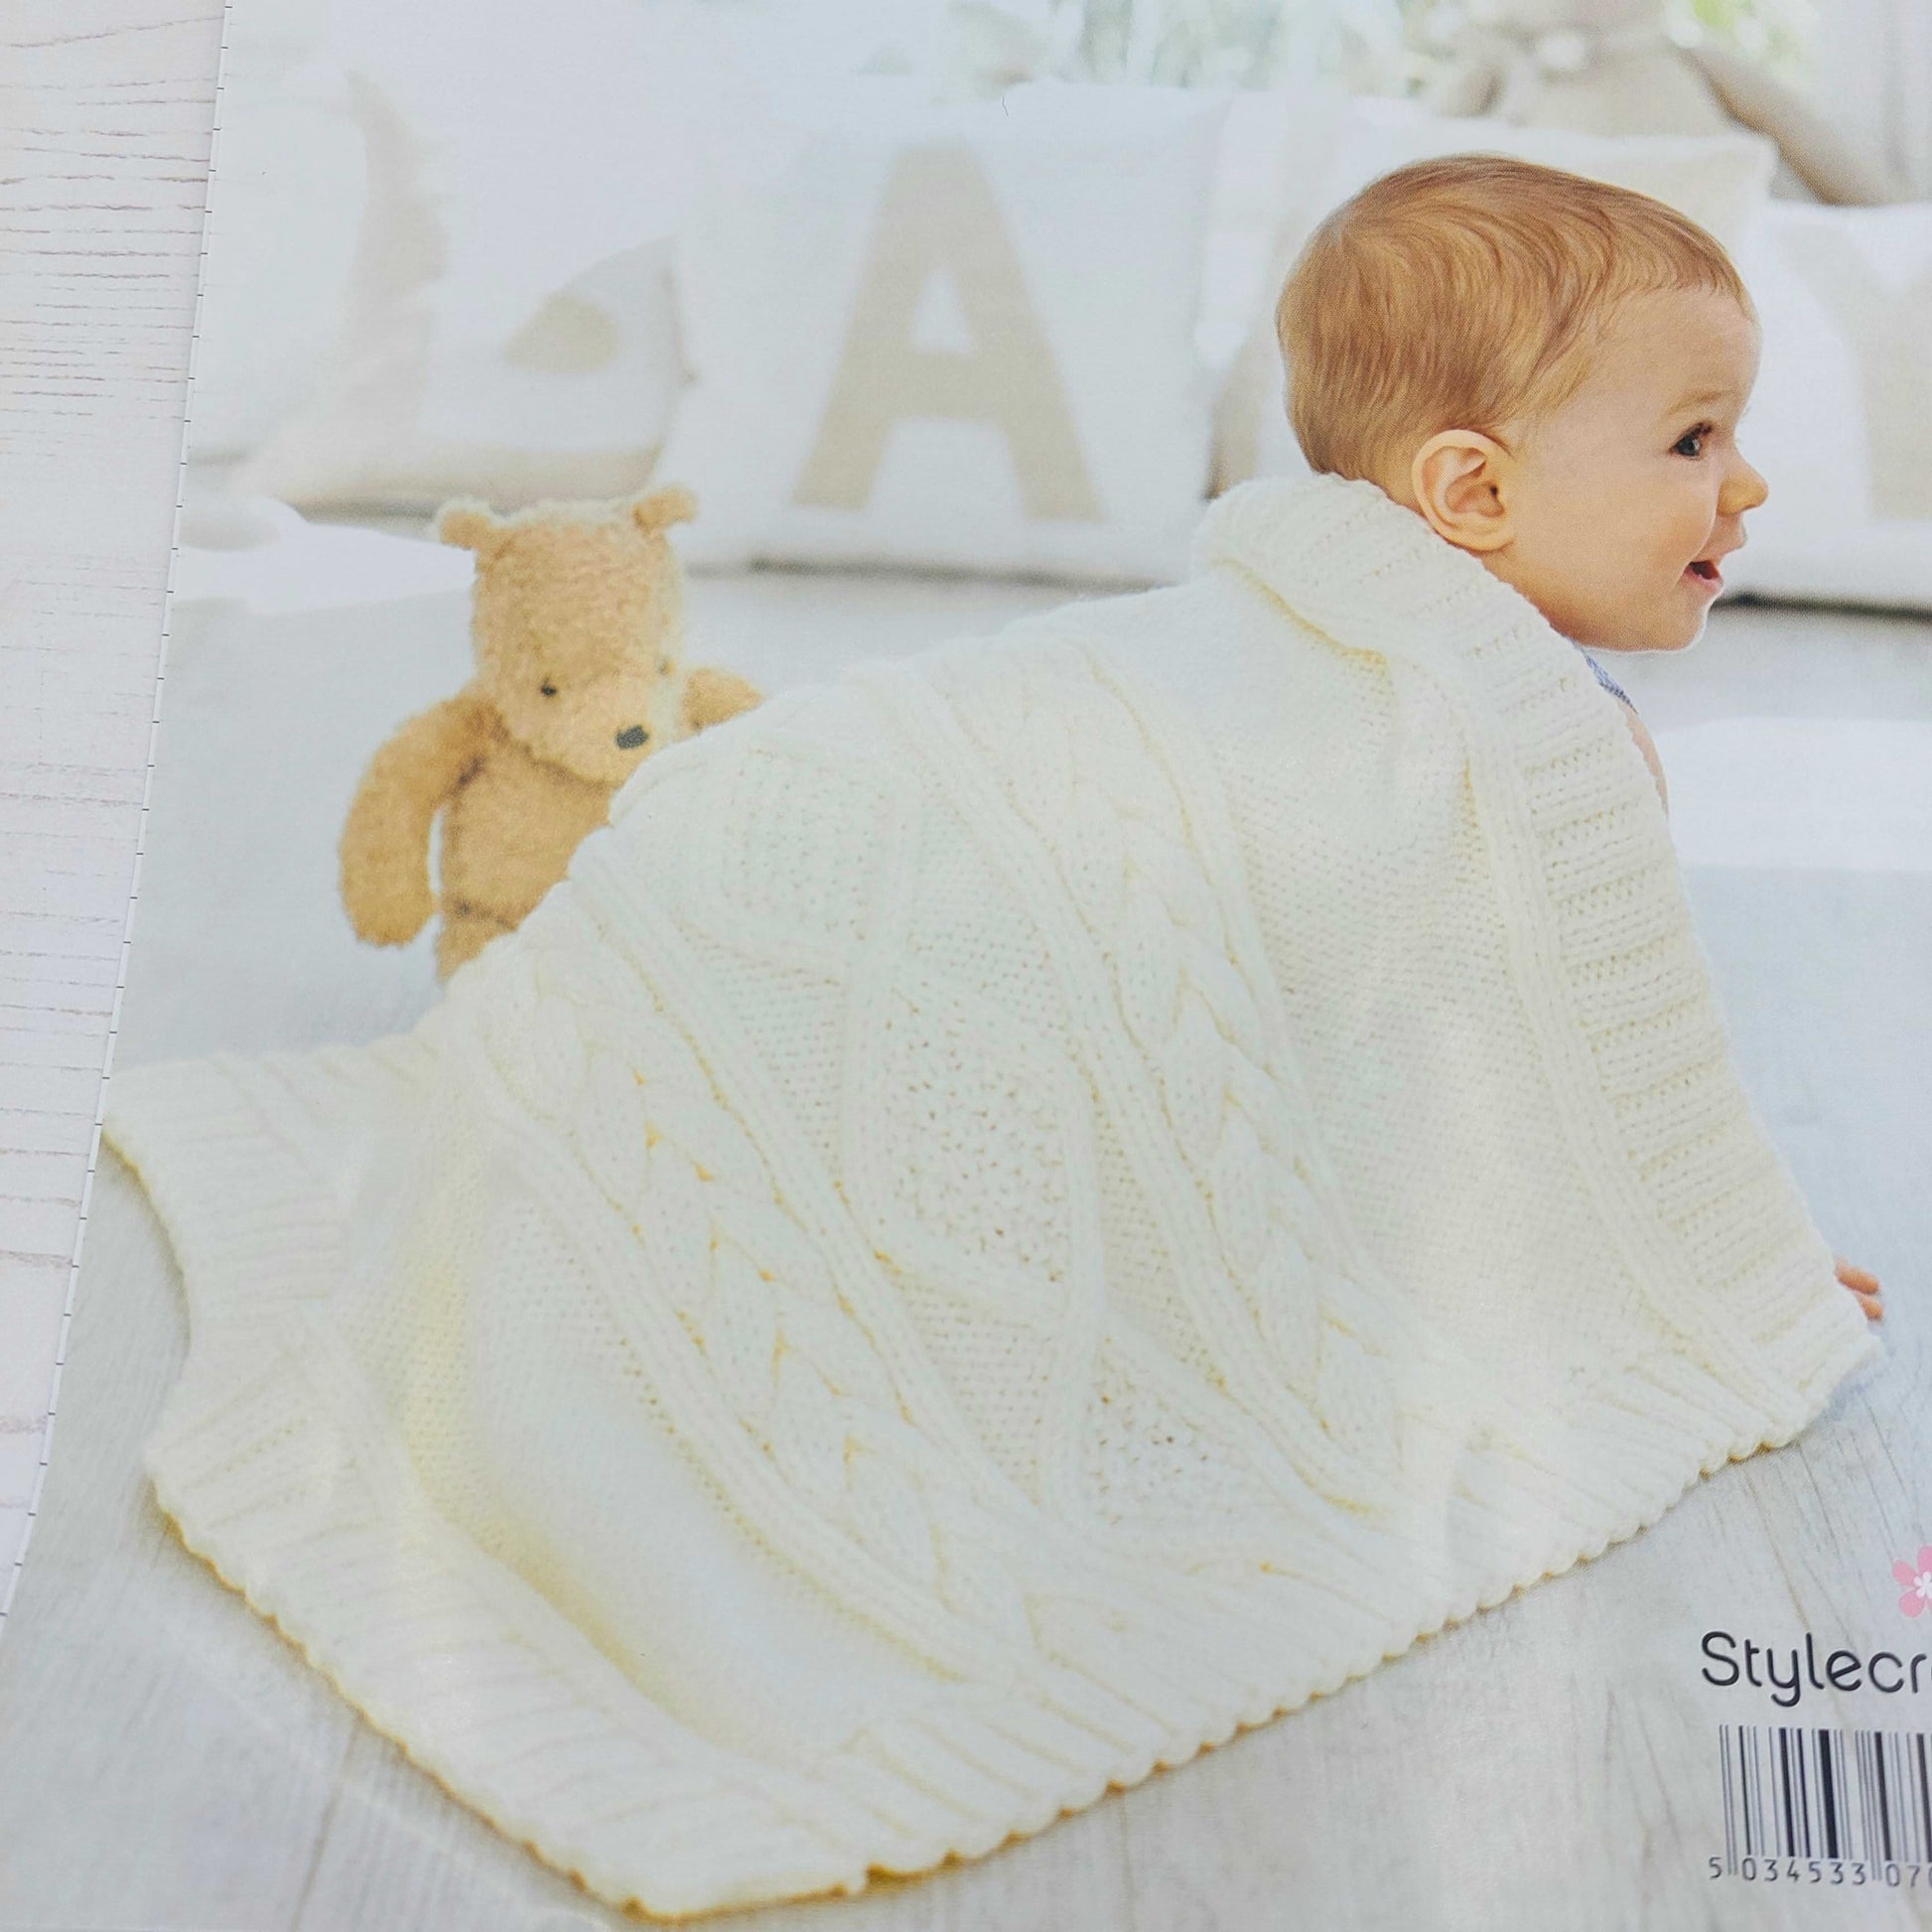 Baby with cream knitted blanket